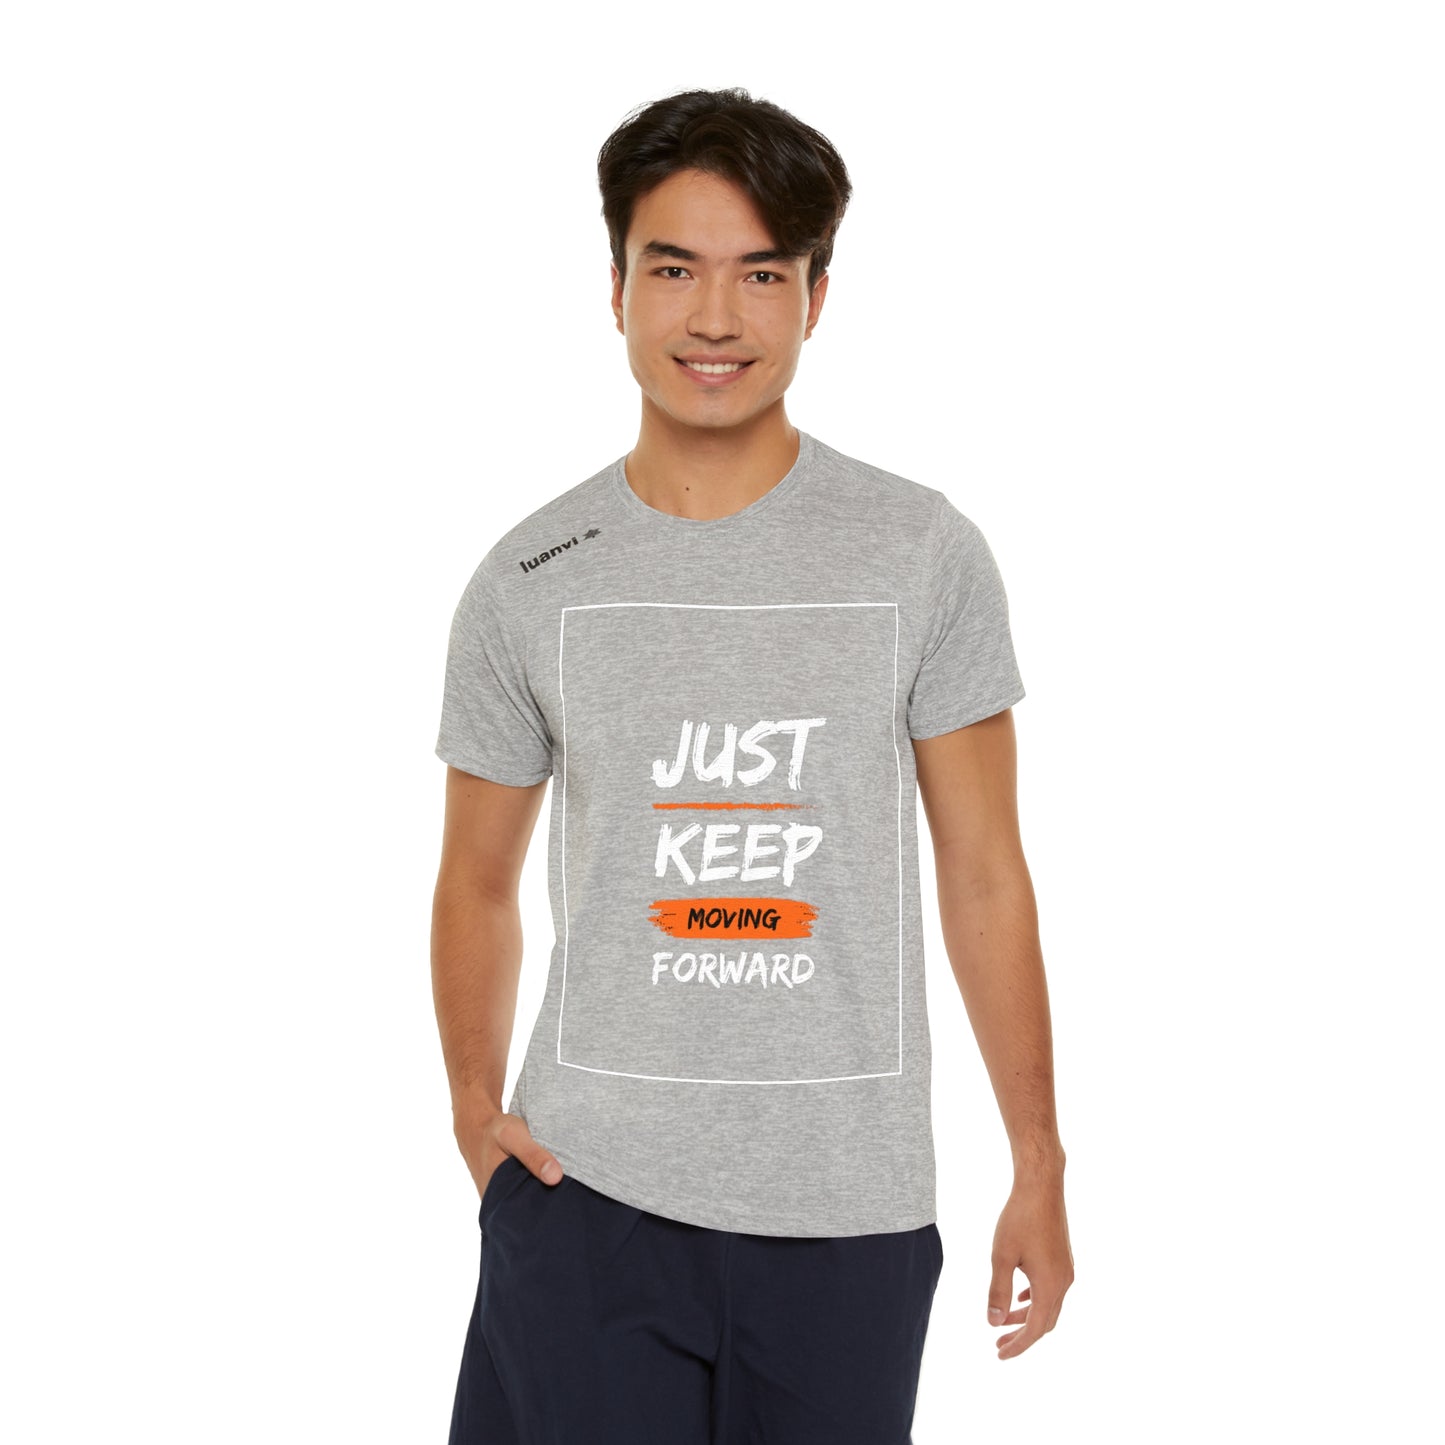 PoM's series Self Motivation ... Just Keep Moving (affirmation) - MEN's Sports T-shirt (skin breathing with Eco friendly print, 100% moisture-wicking polyester fabric)